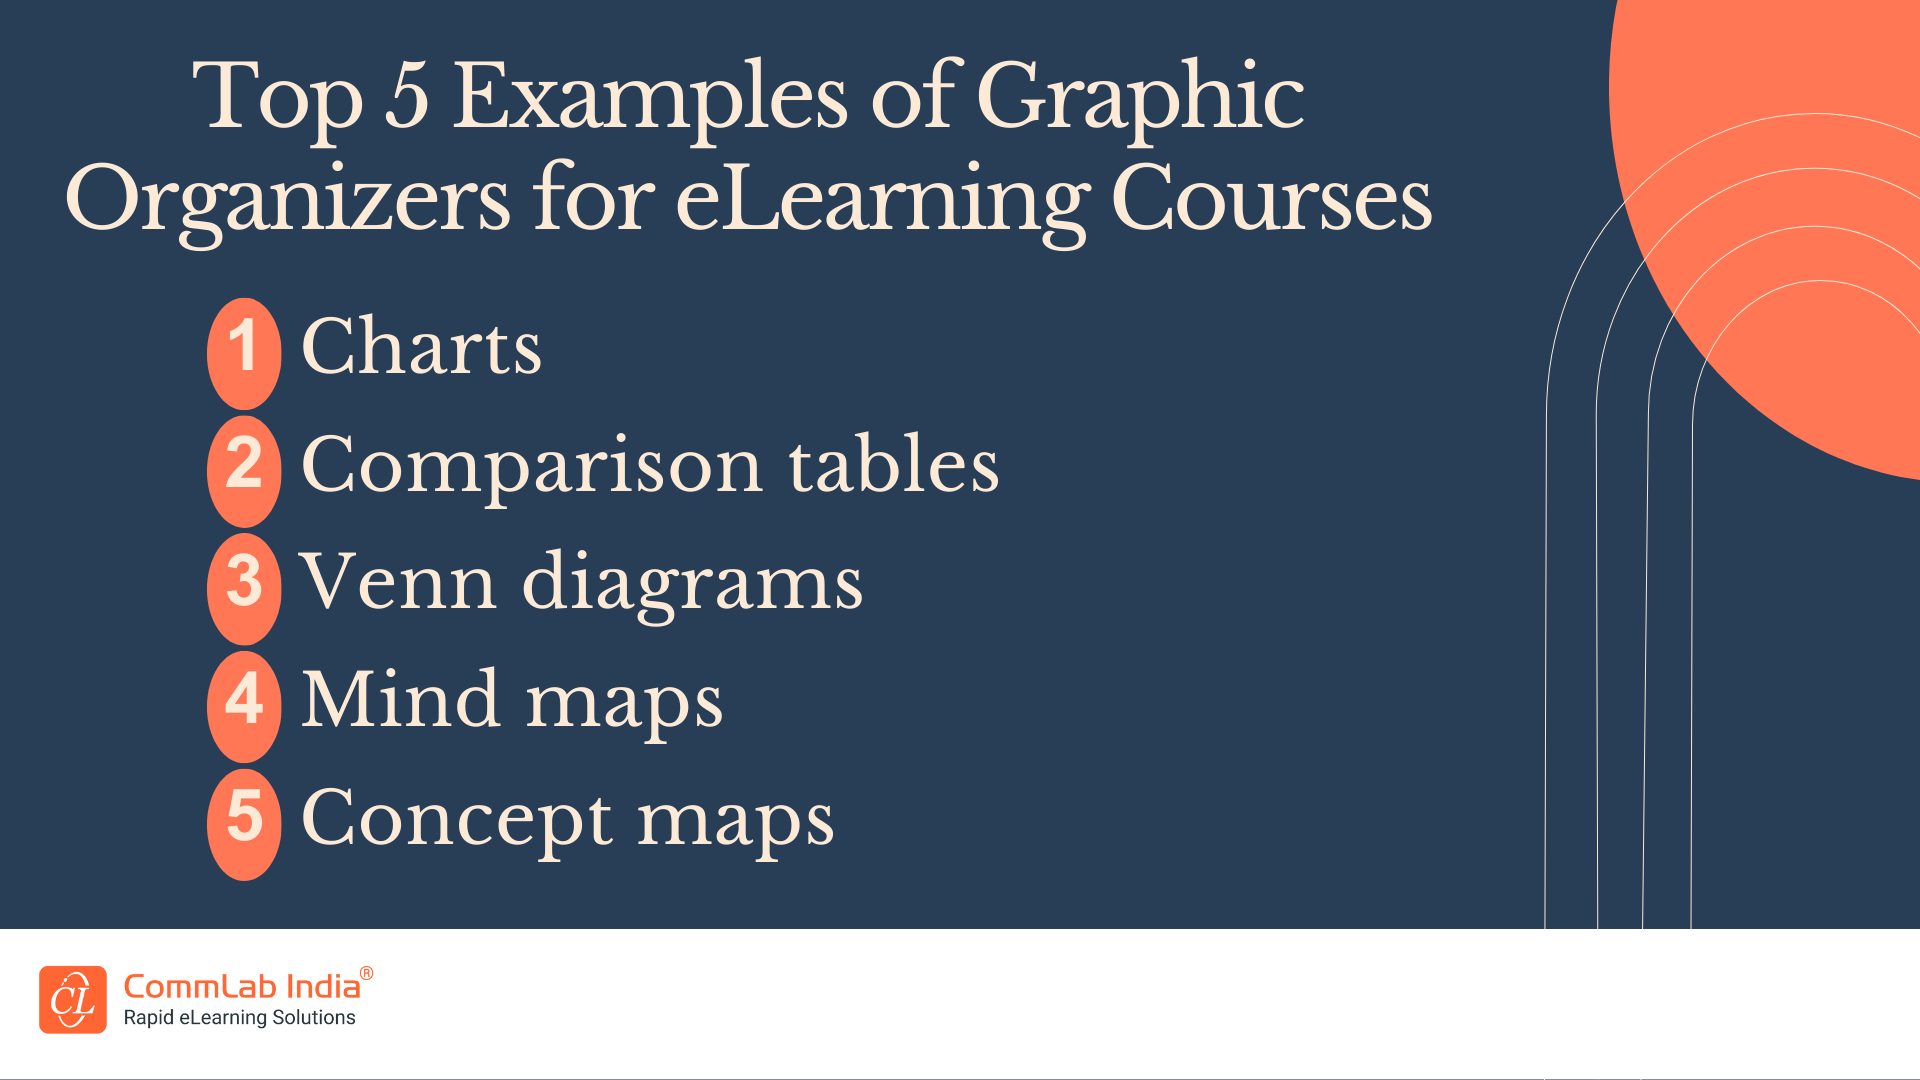 Top 5 Examples of Graphic Organizers for eLearning Courses